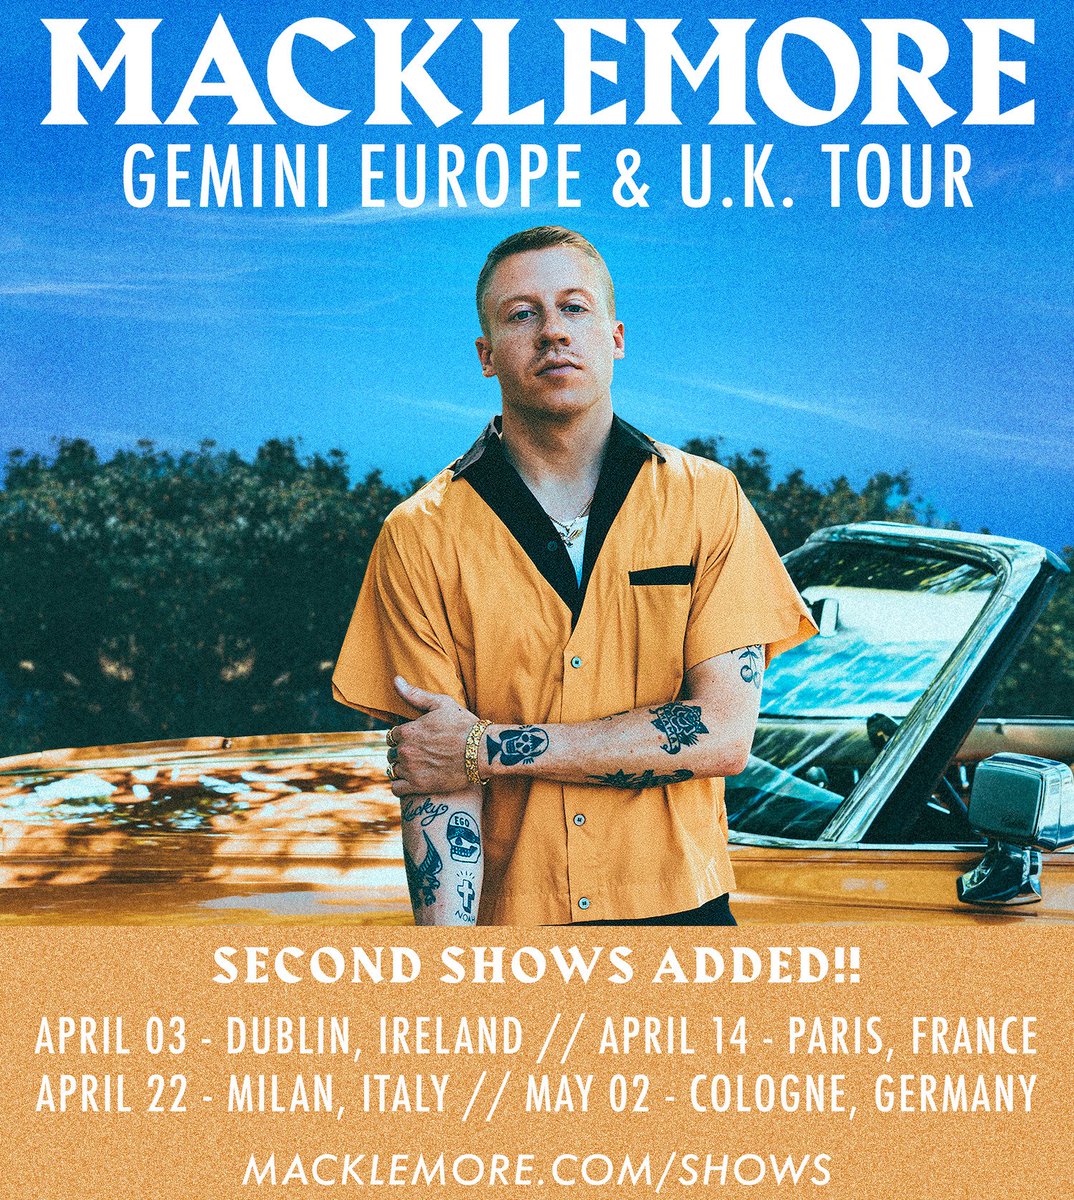 Ayyyyy! We're adding SECOND shows in DUBLIN, MILAN, COLOGNE AND PARIS!! https://t.co/SdimeCjMVK for tickets! https://t.co/GZ29mCvgxK